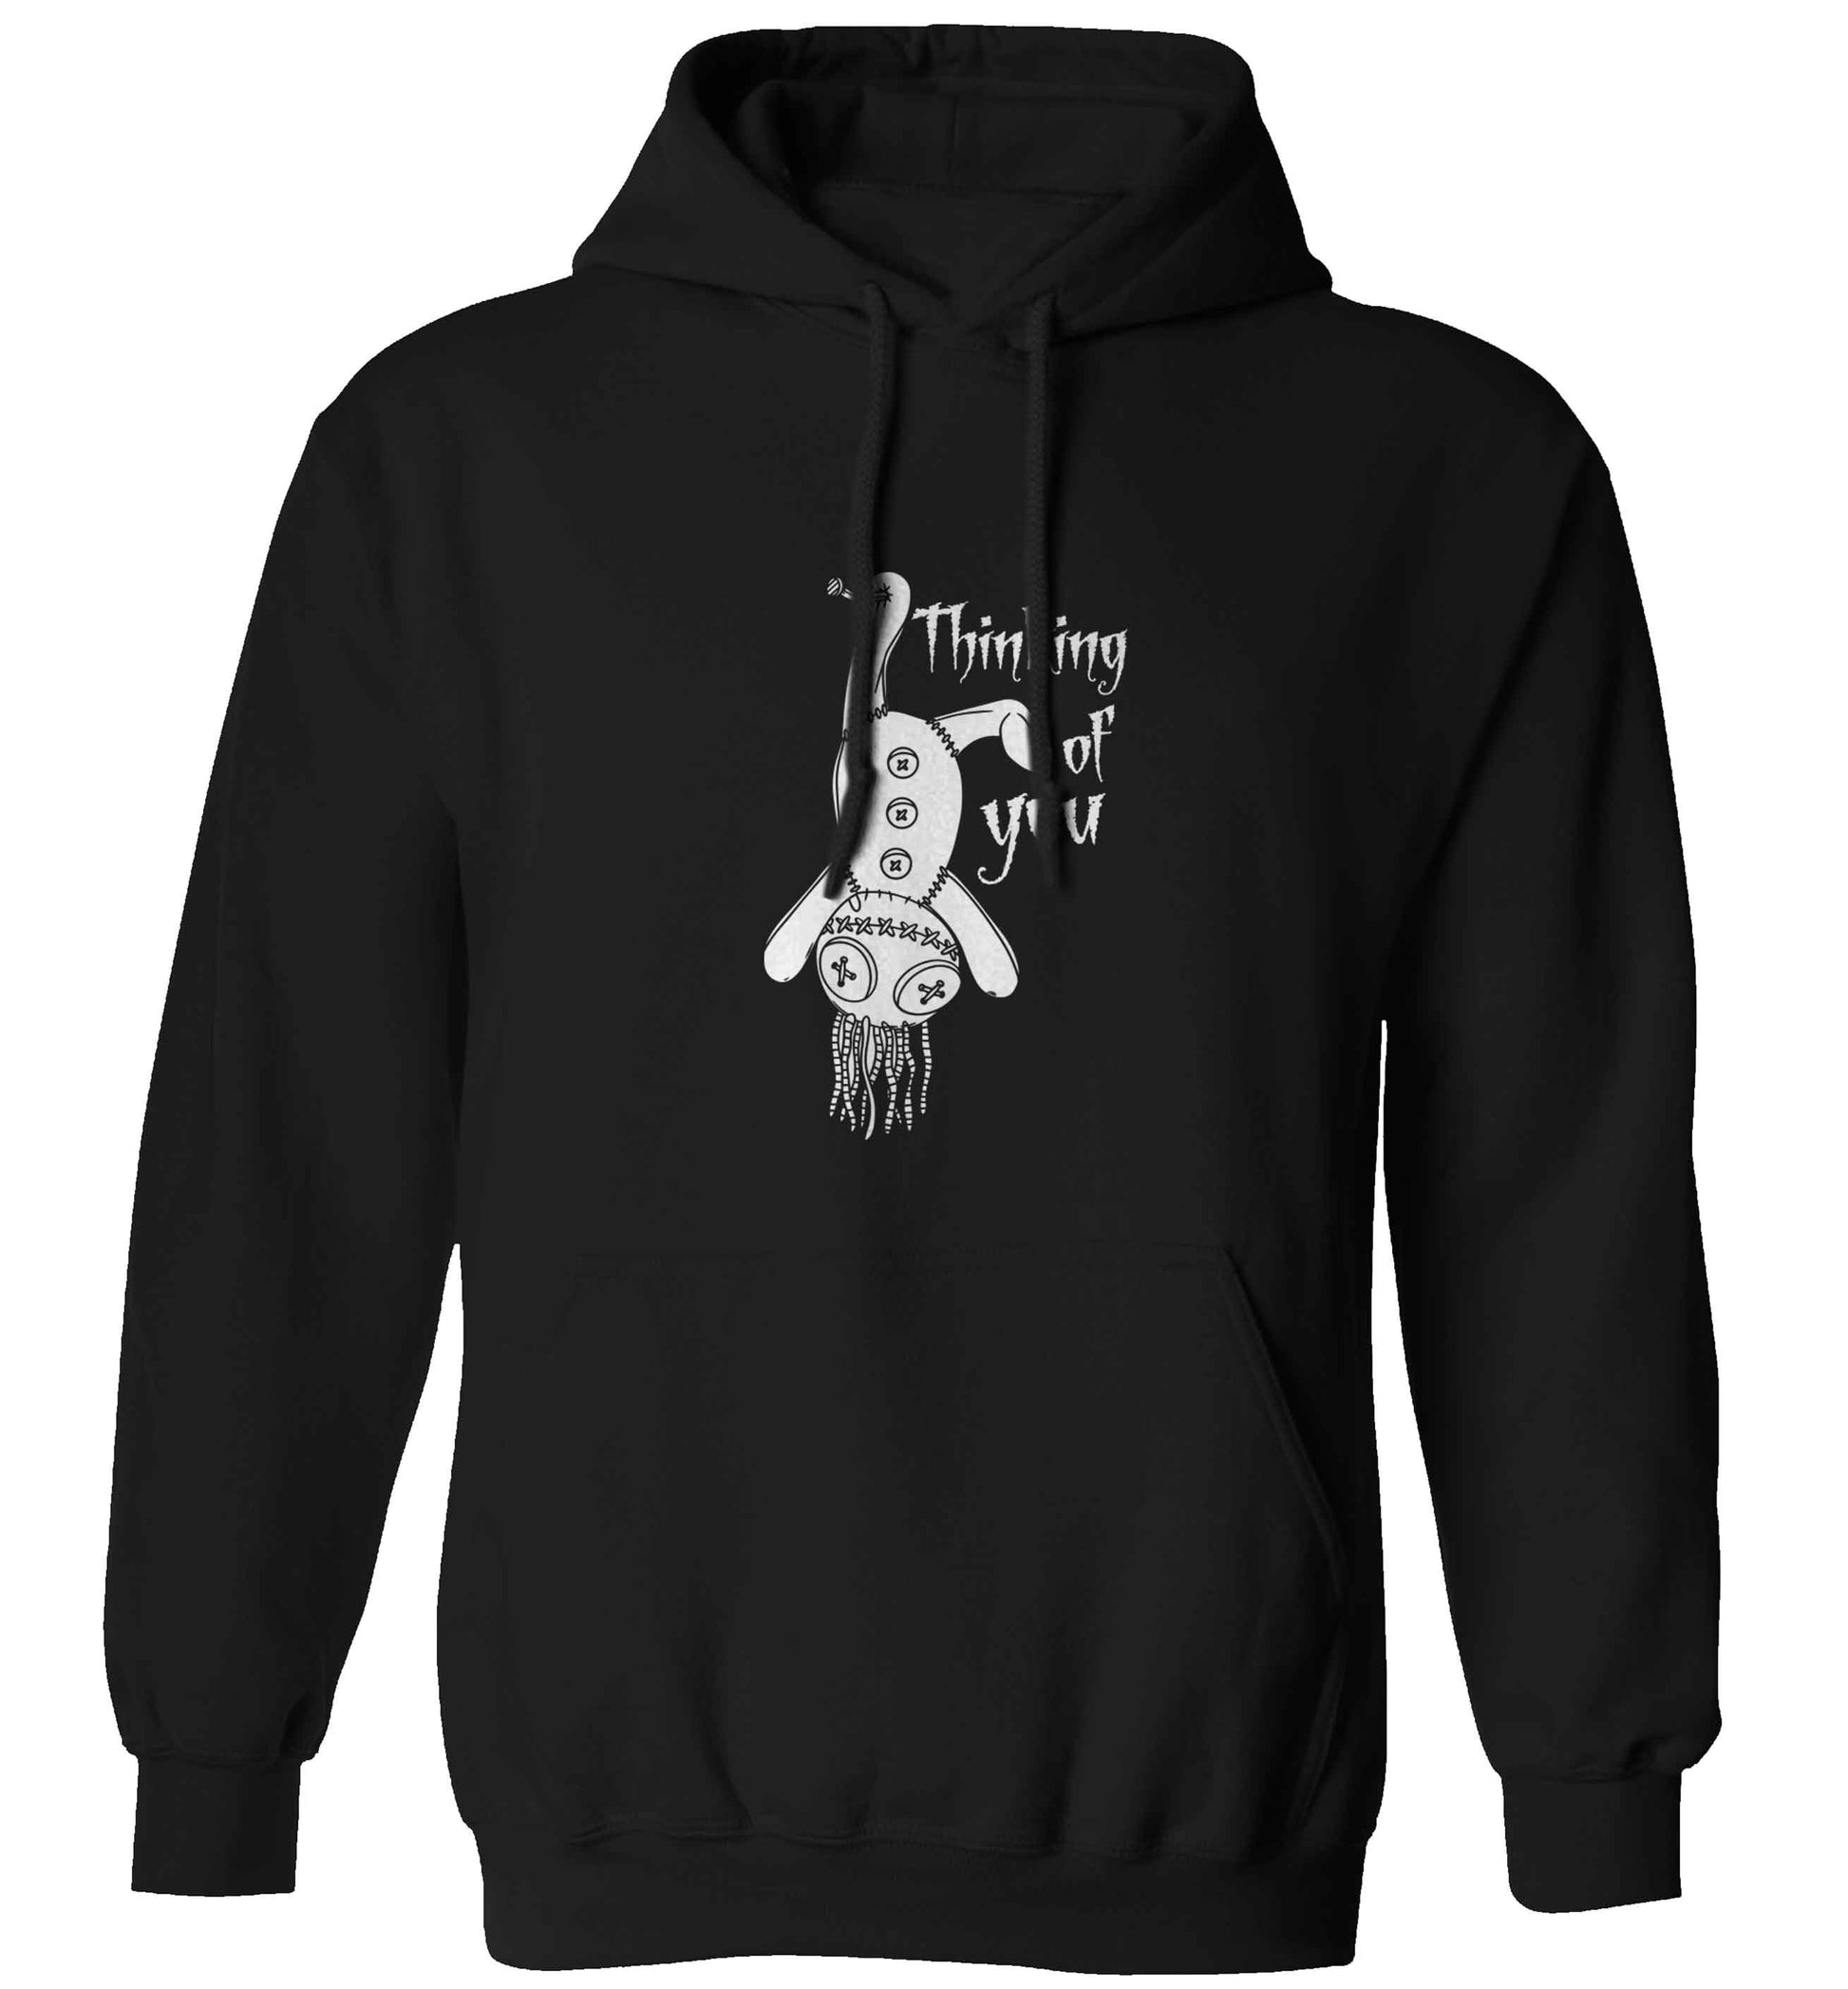 Thinking of you adults unisex black hoodie 2XL